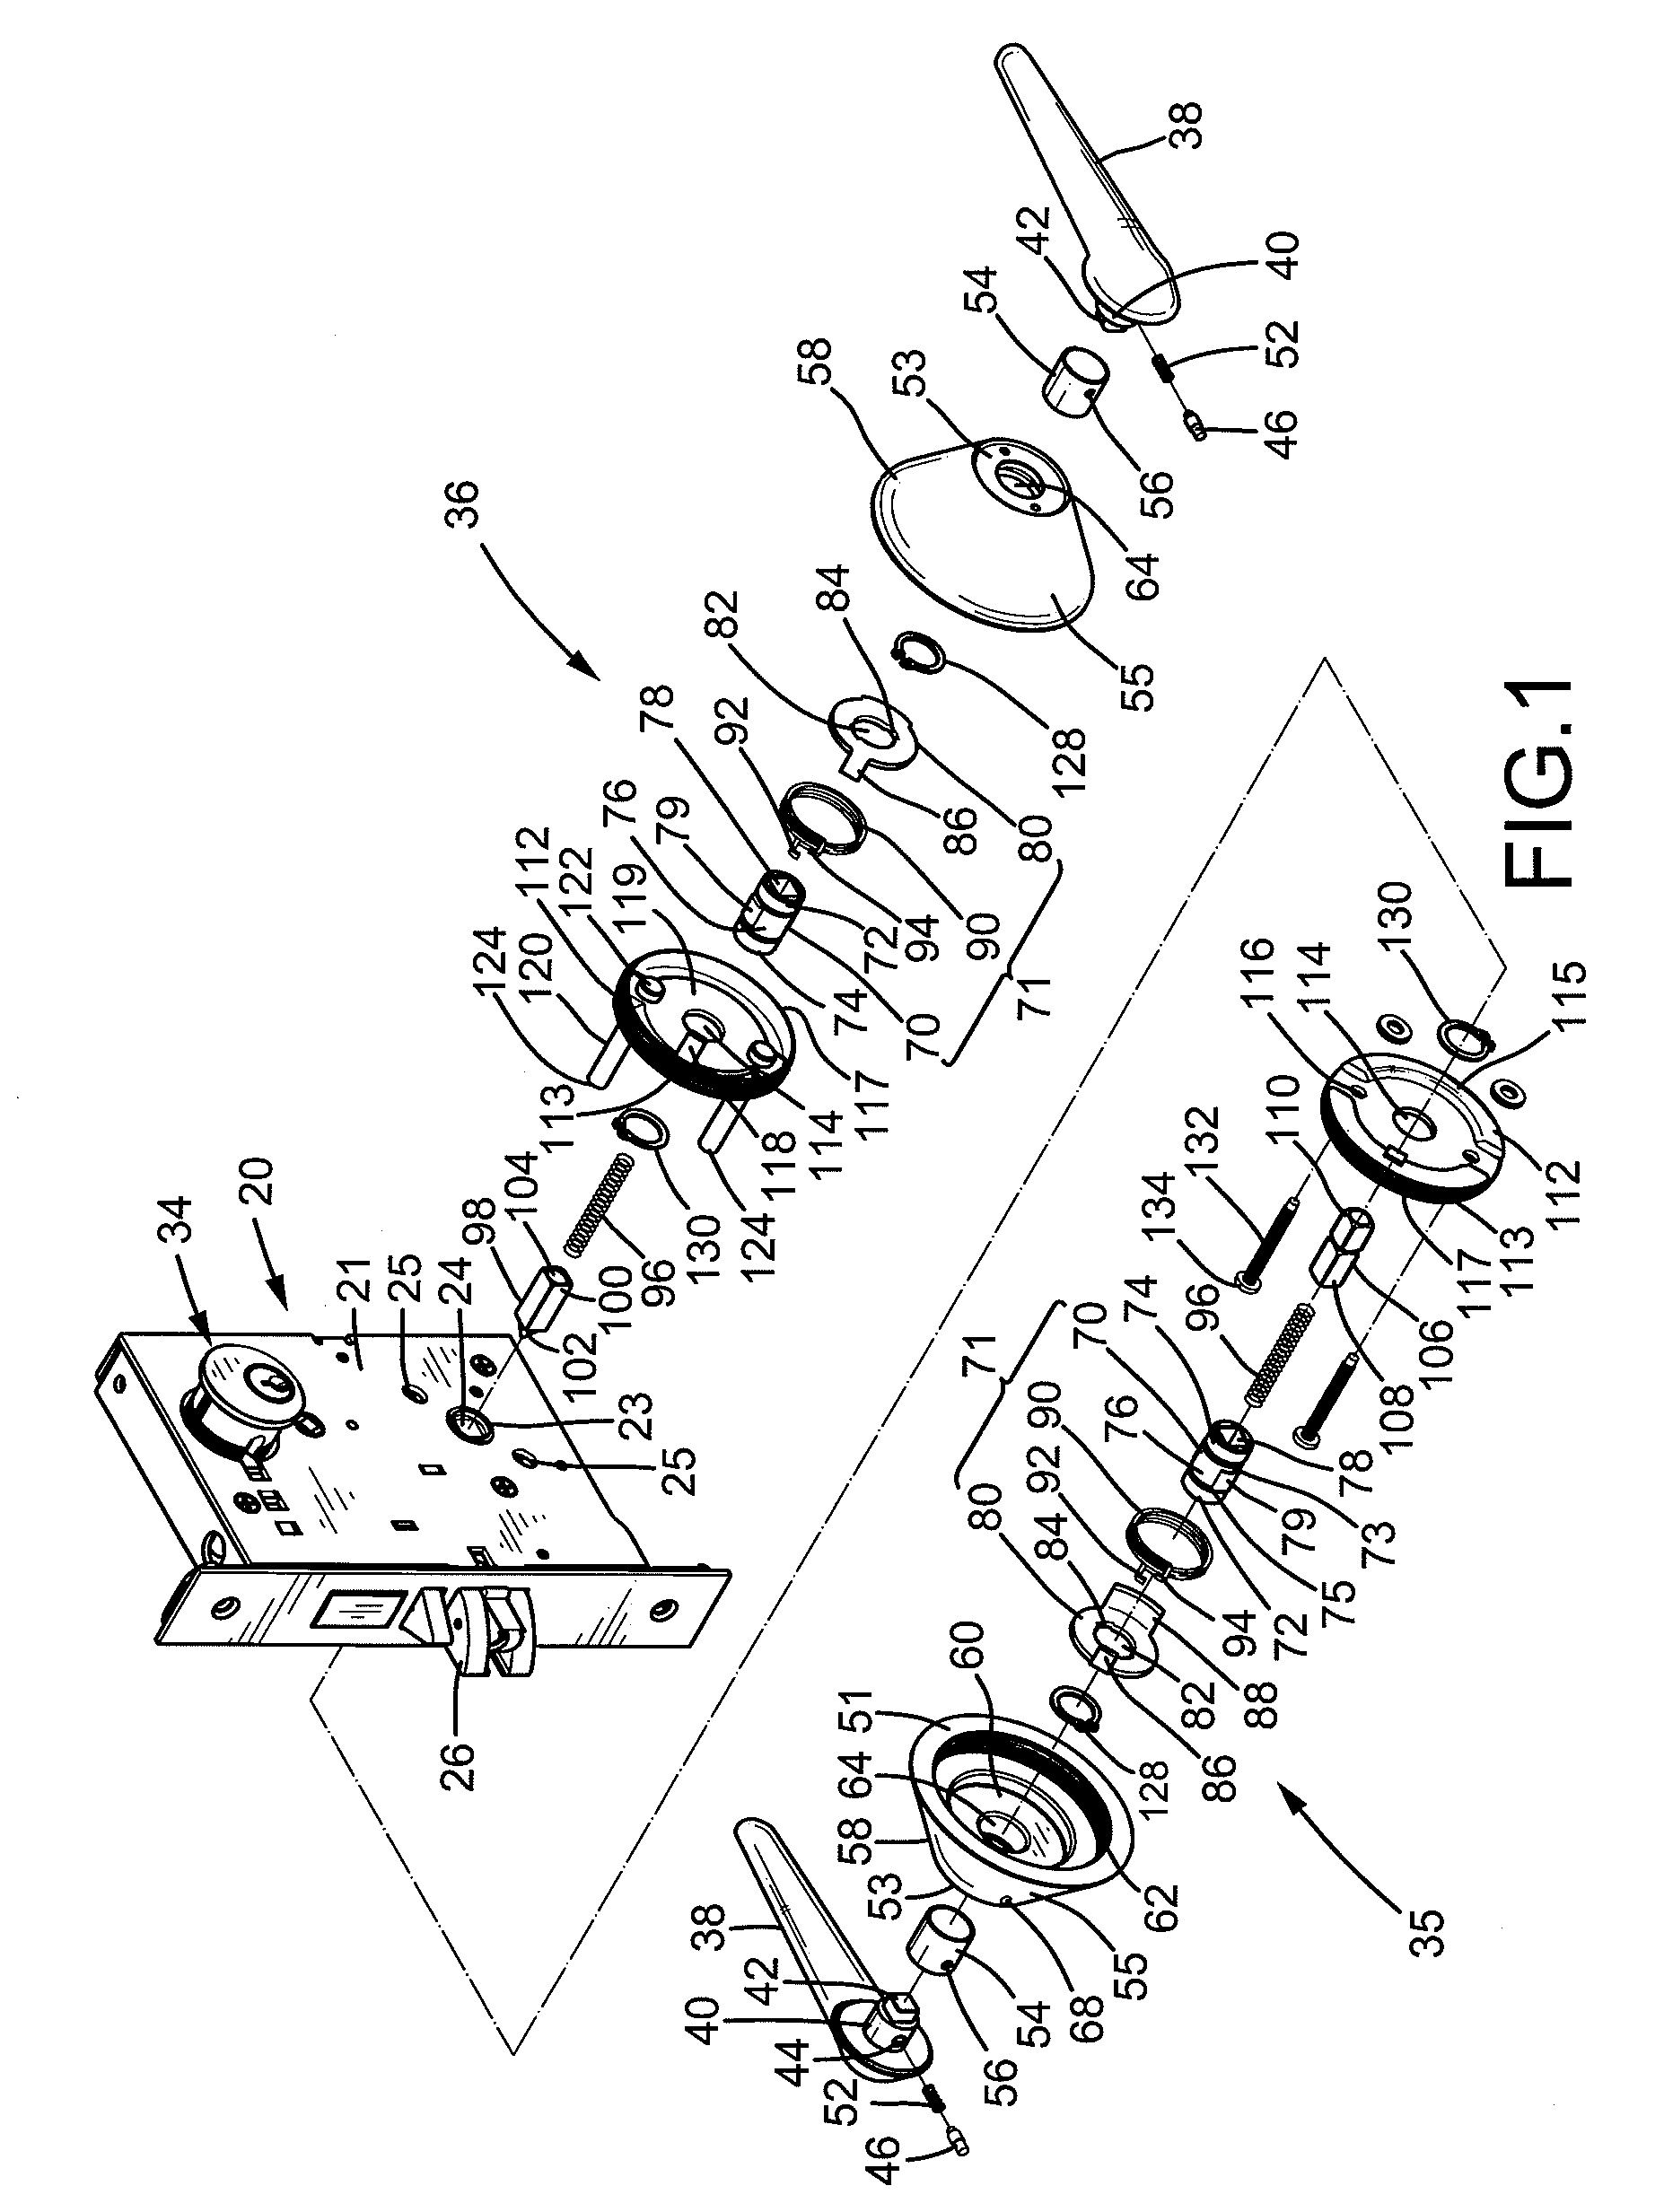 Operational Device for Lock